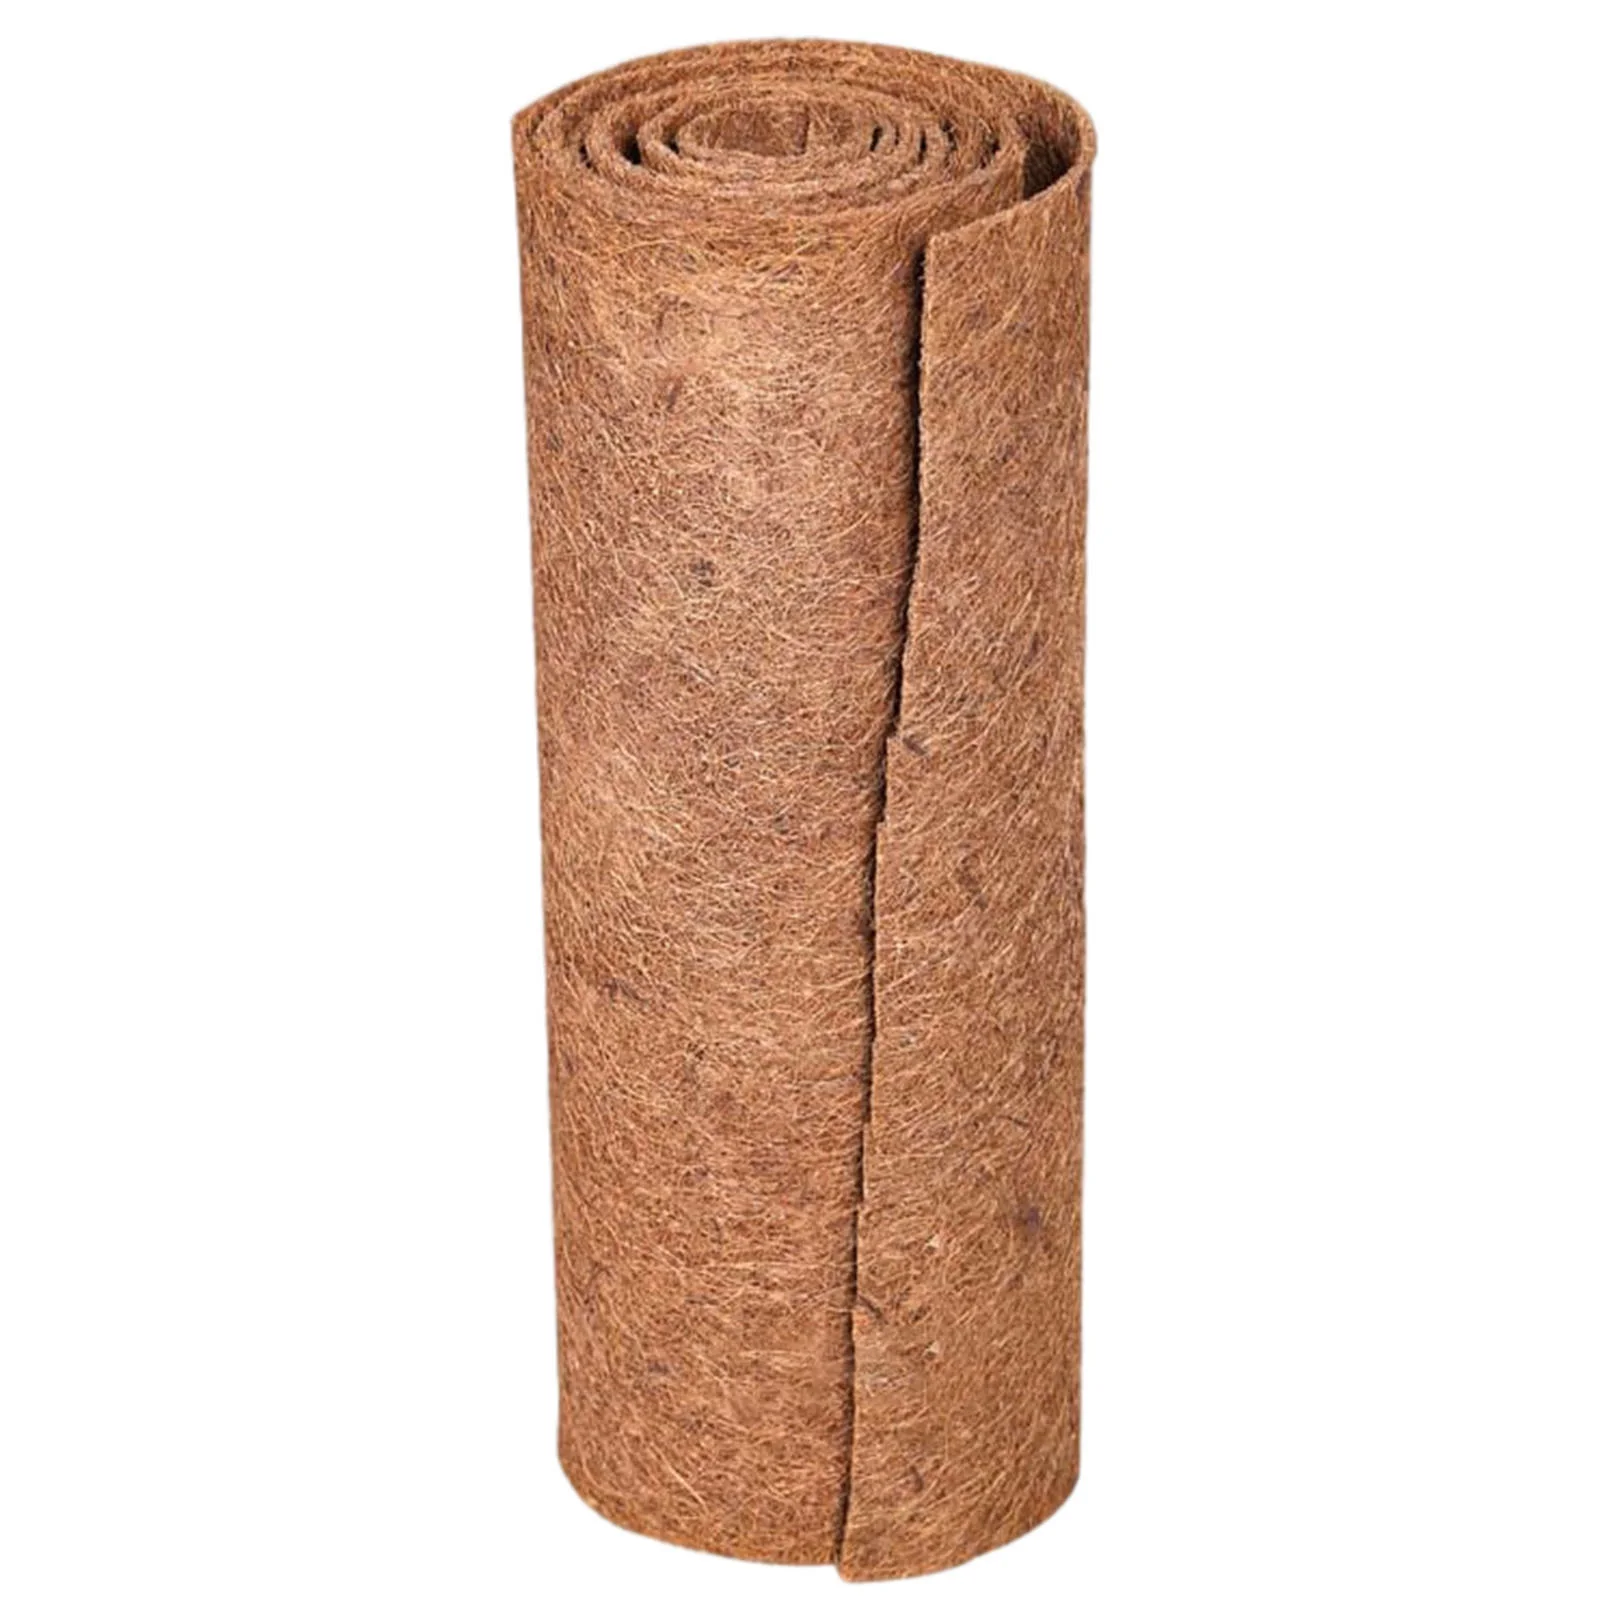 

Coco Liner Roll For Planters Coconut Mat Reptile Bedding Supplies Fiber Coir Liners For Lizard Snake Chameleon Turtle Bearded